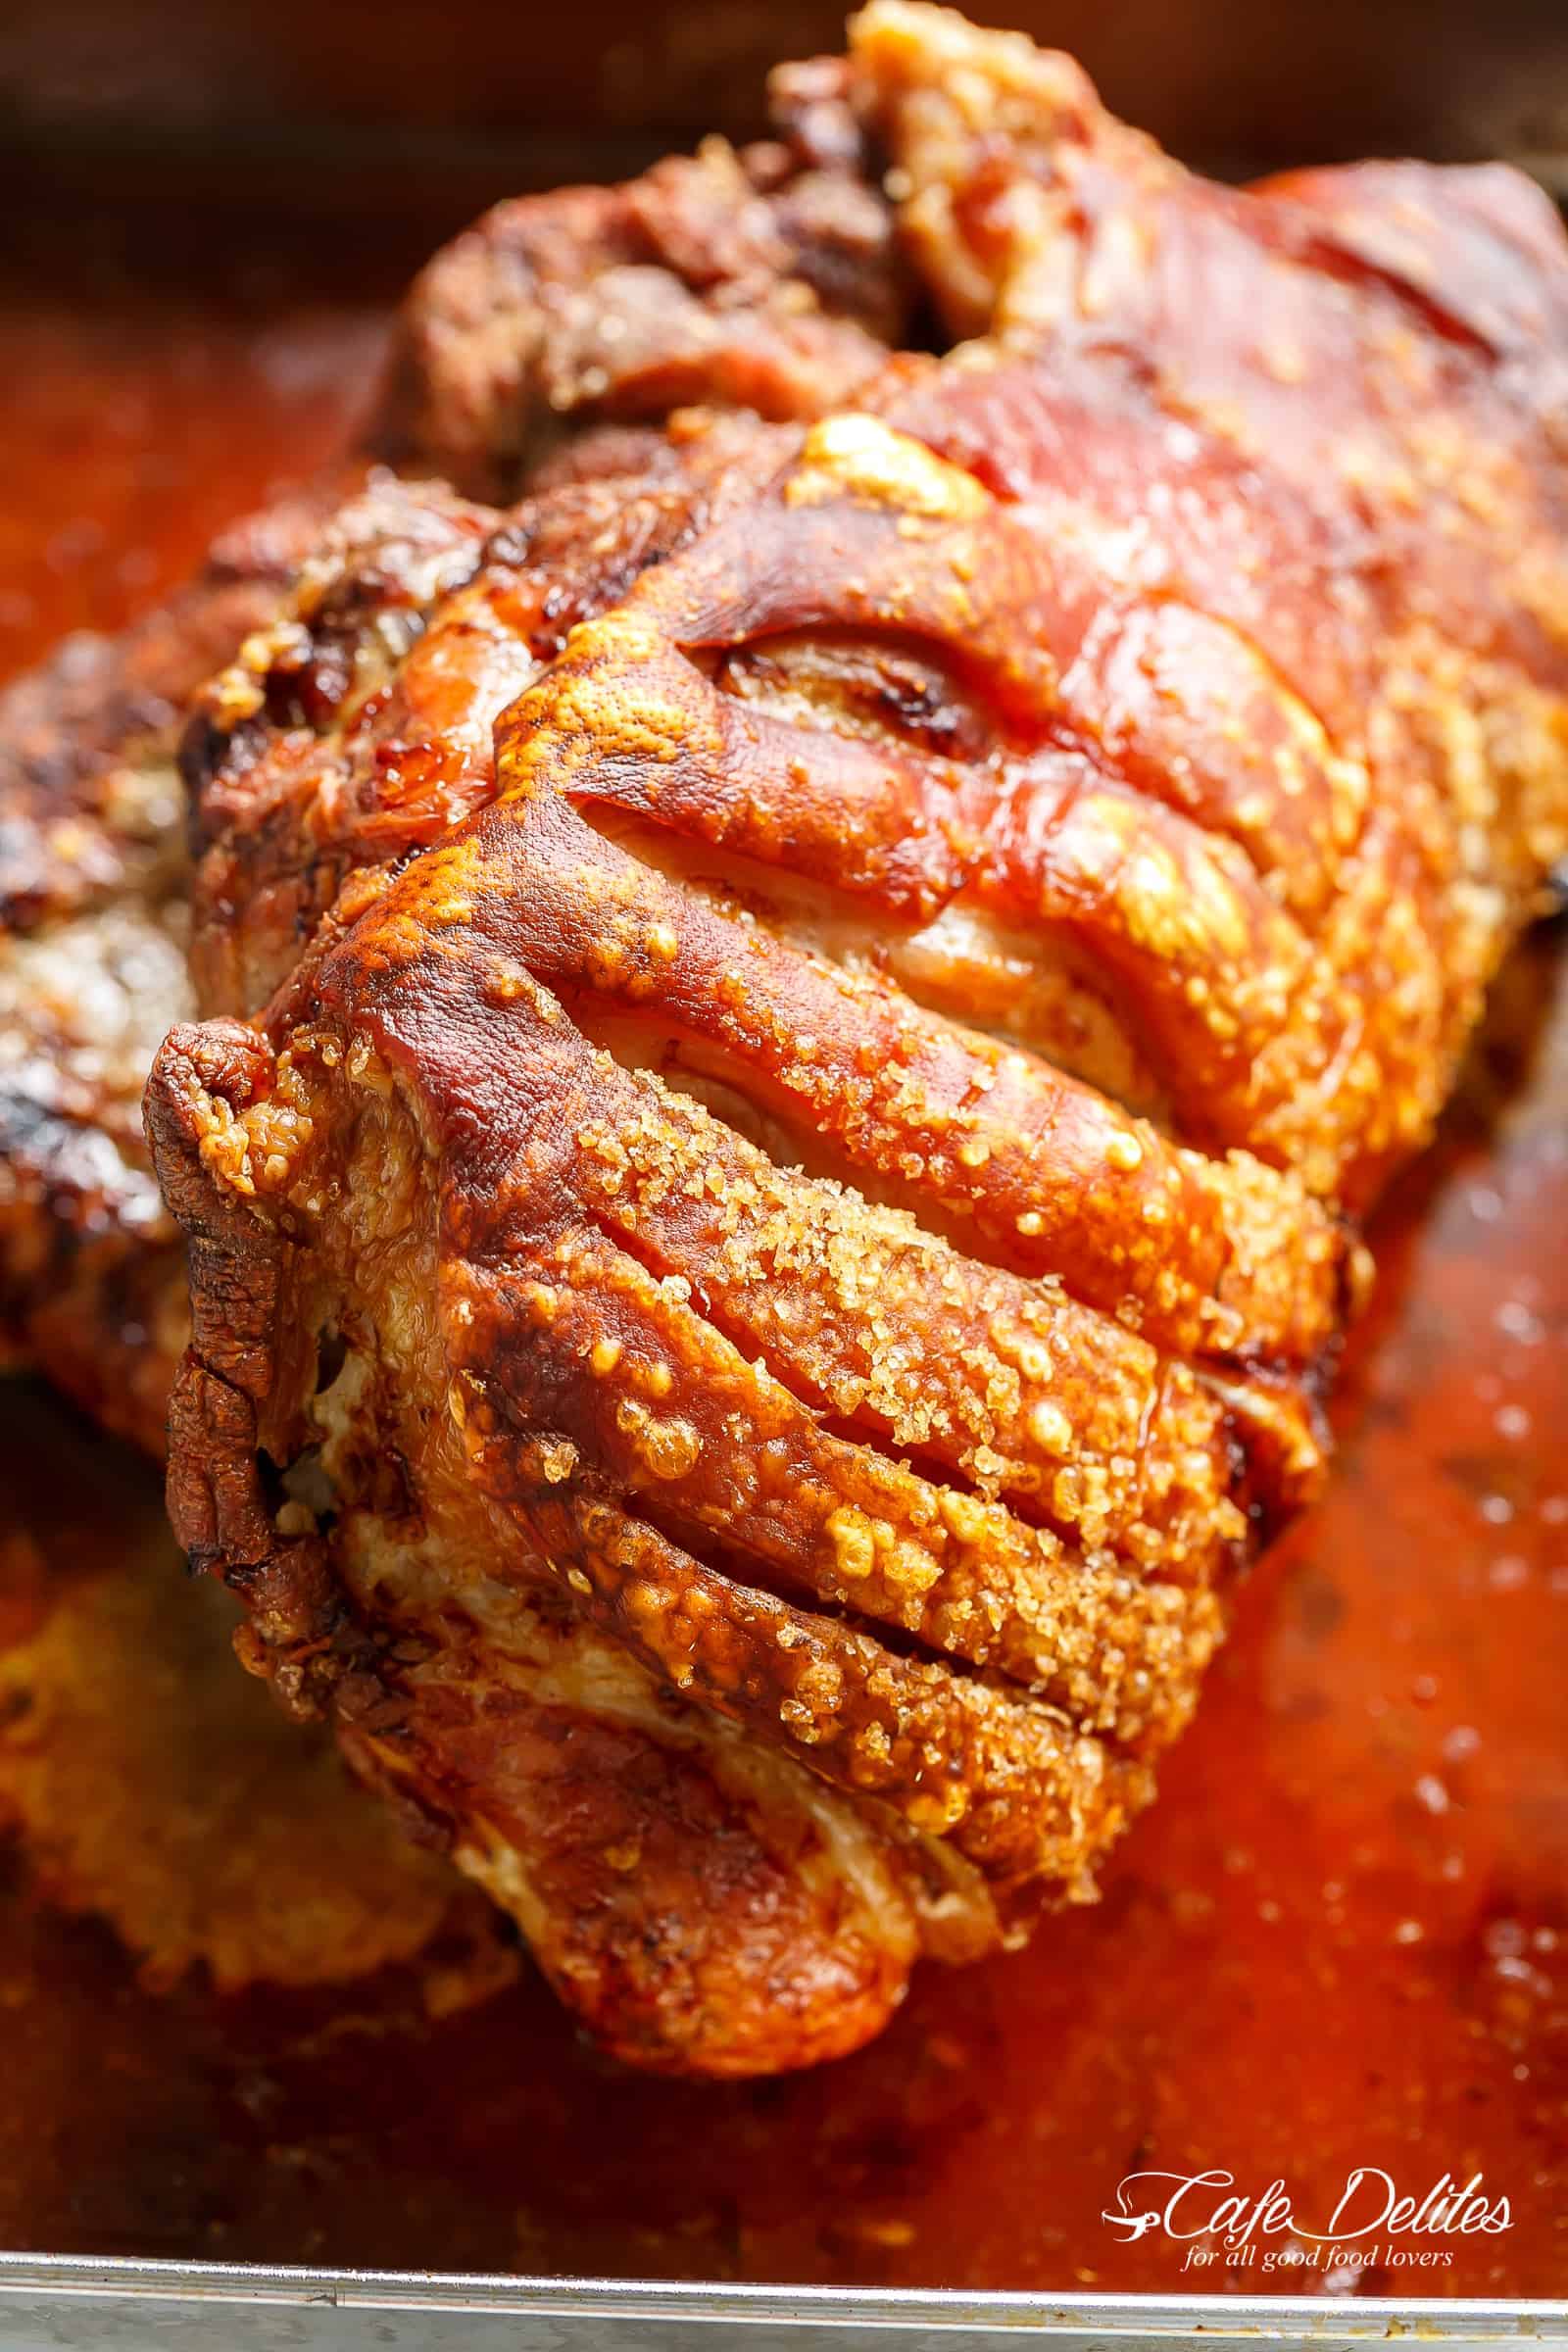 The Most Perfect Pork Roast With Crackling to hit your weekend or holiday table! Roasting a pork shoulder or butt is so easy, but to get the crackle makes it all the more worth every minute waiting! | cafedelites.com